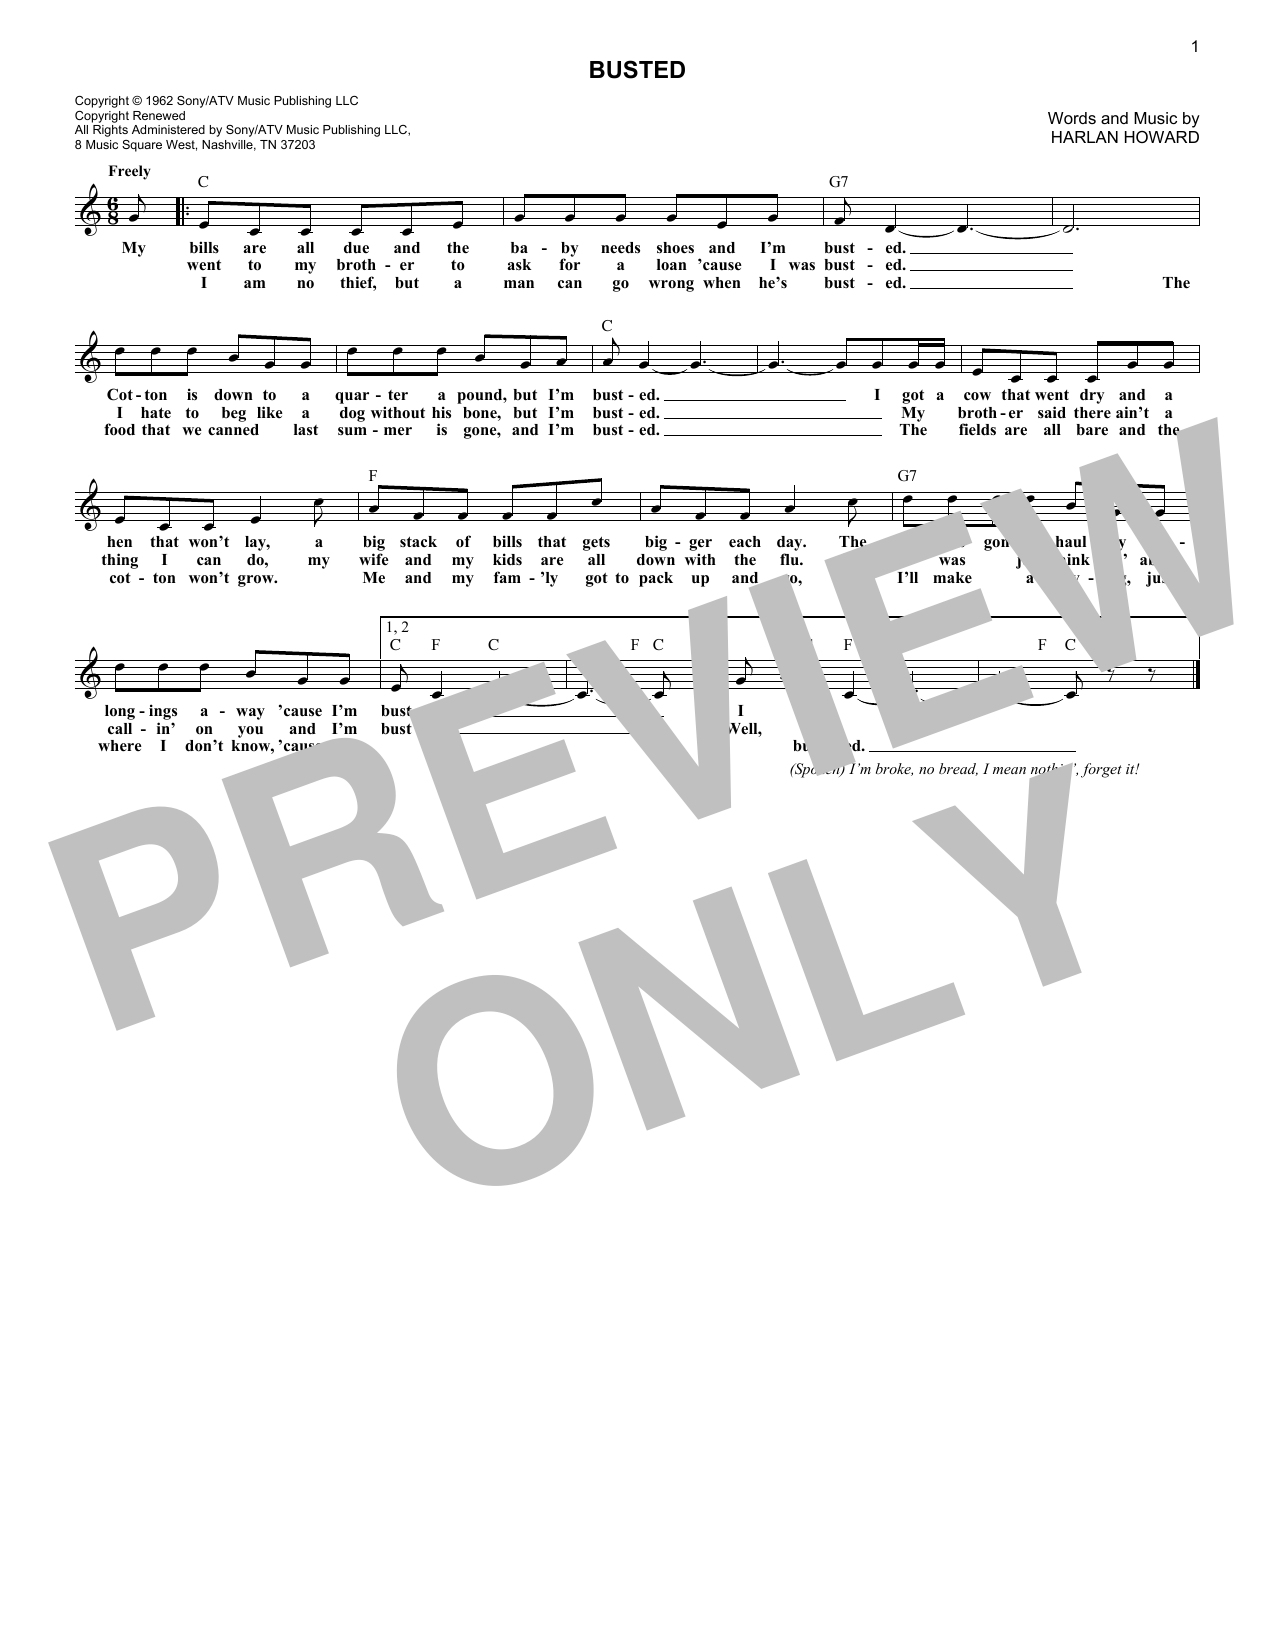 Busted sheet music